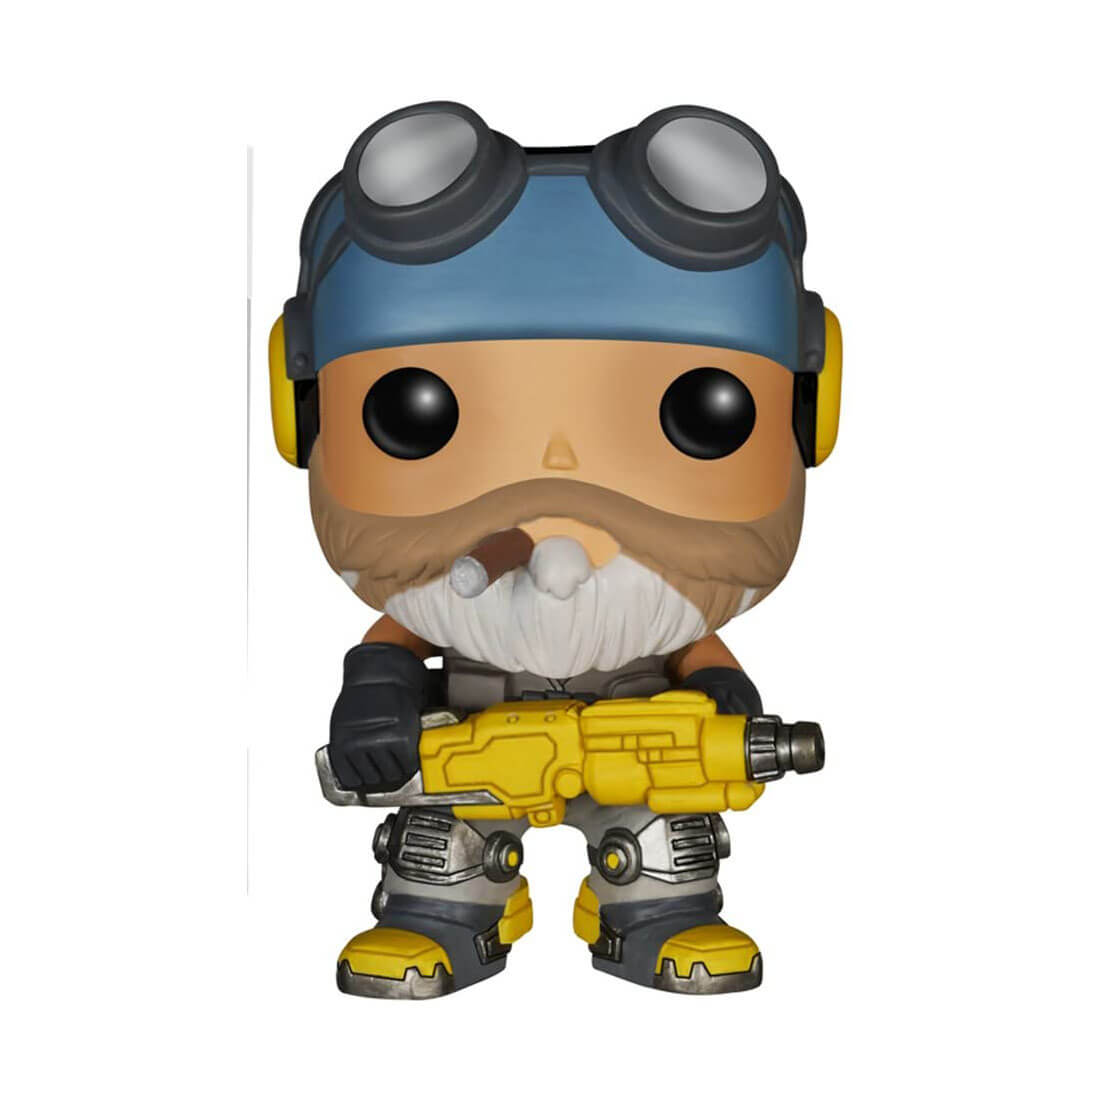 Front view of the Funko POP Evolve Hank #39 figure.